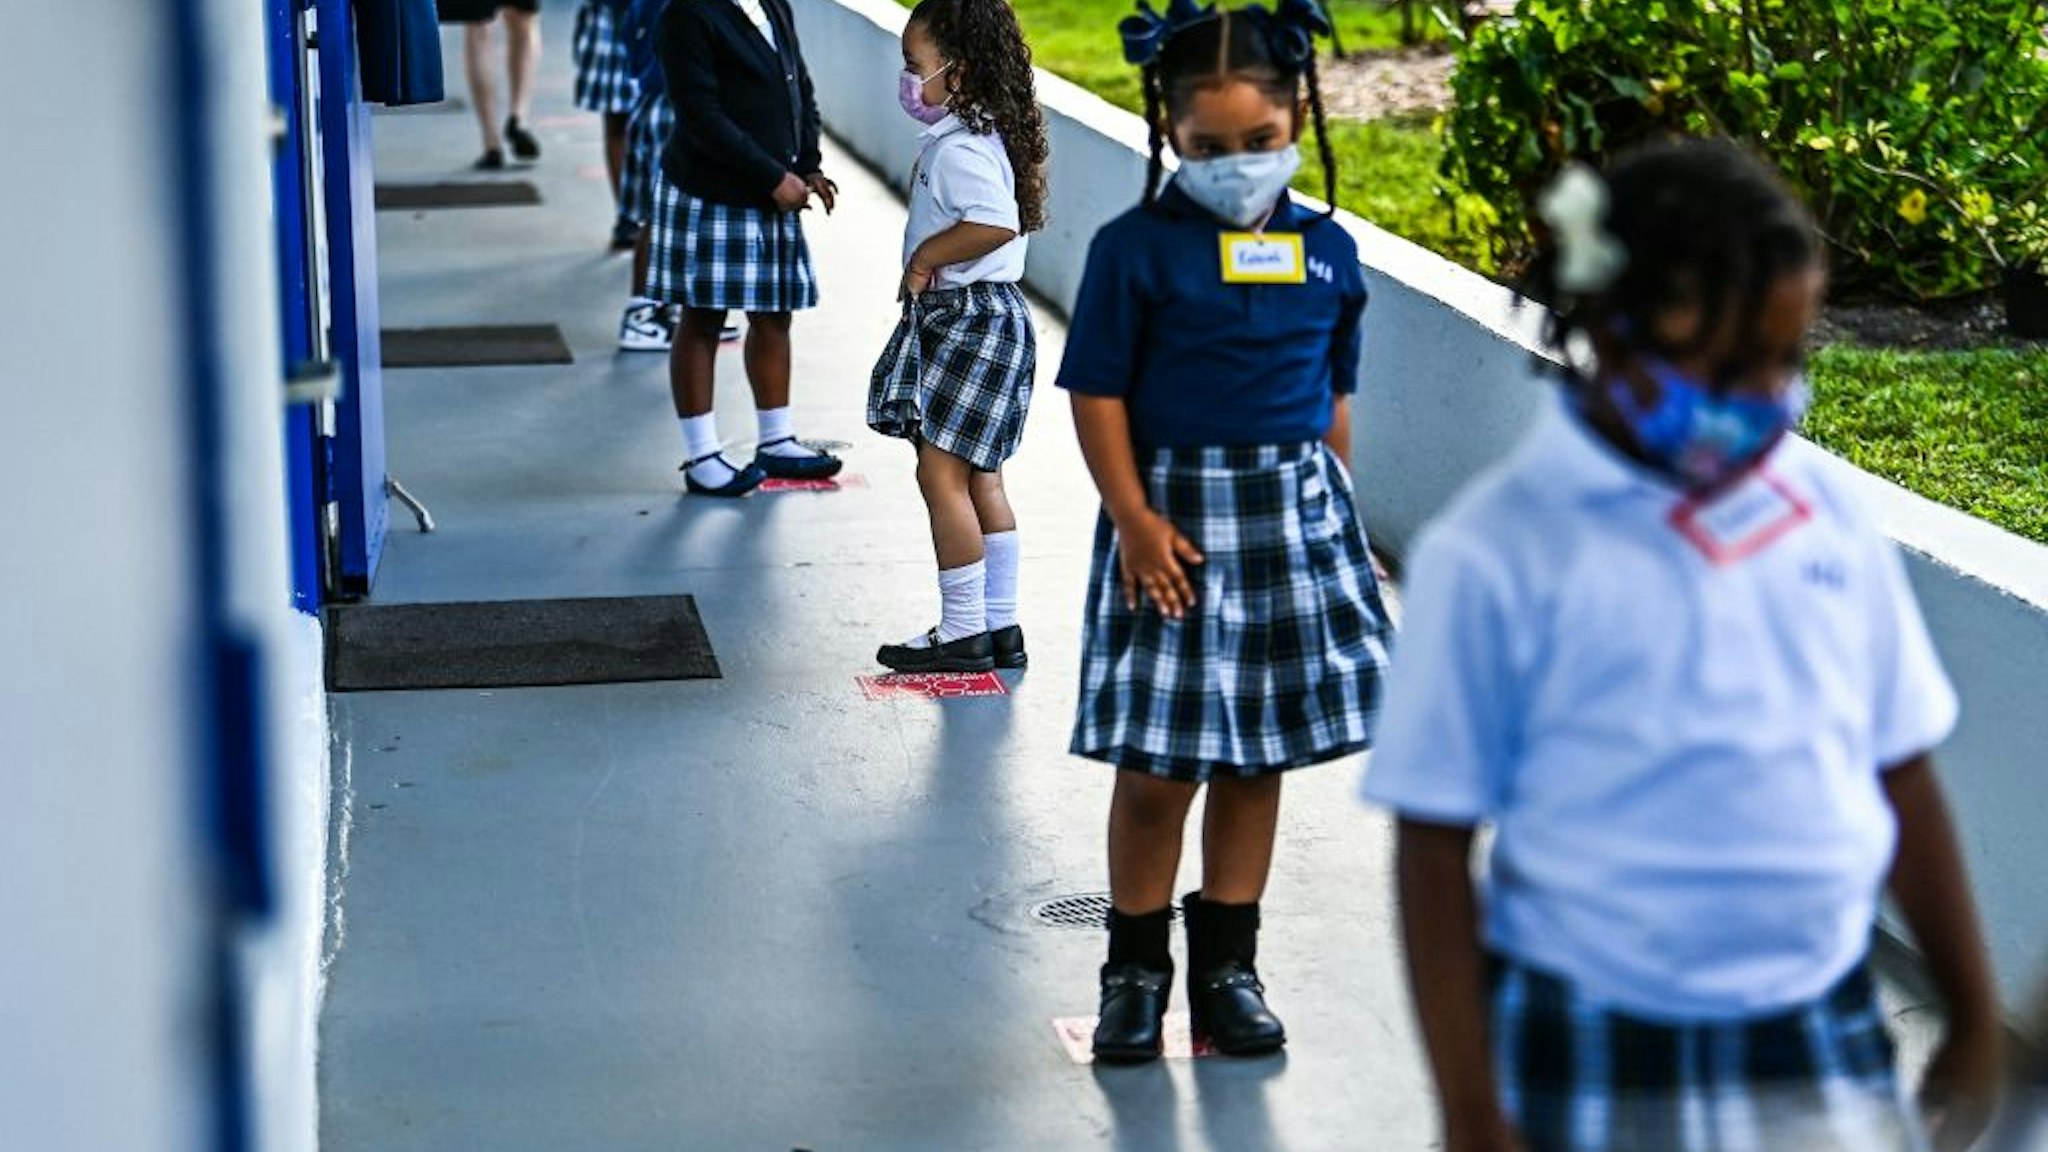 Students wear facemasks and stand in a social distance on their first day of school after summer vacation at the St. Lawrence Catholic School in north of Miami, on August 18, 2021. (Photo by CHANDAN KHANNA / AFP) (Photo by CHANDAN KHANNA/AFP via Getty Images)